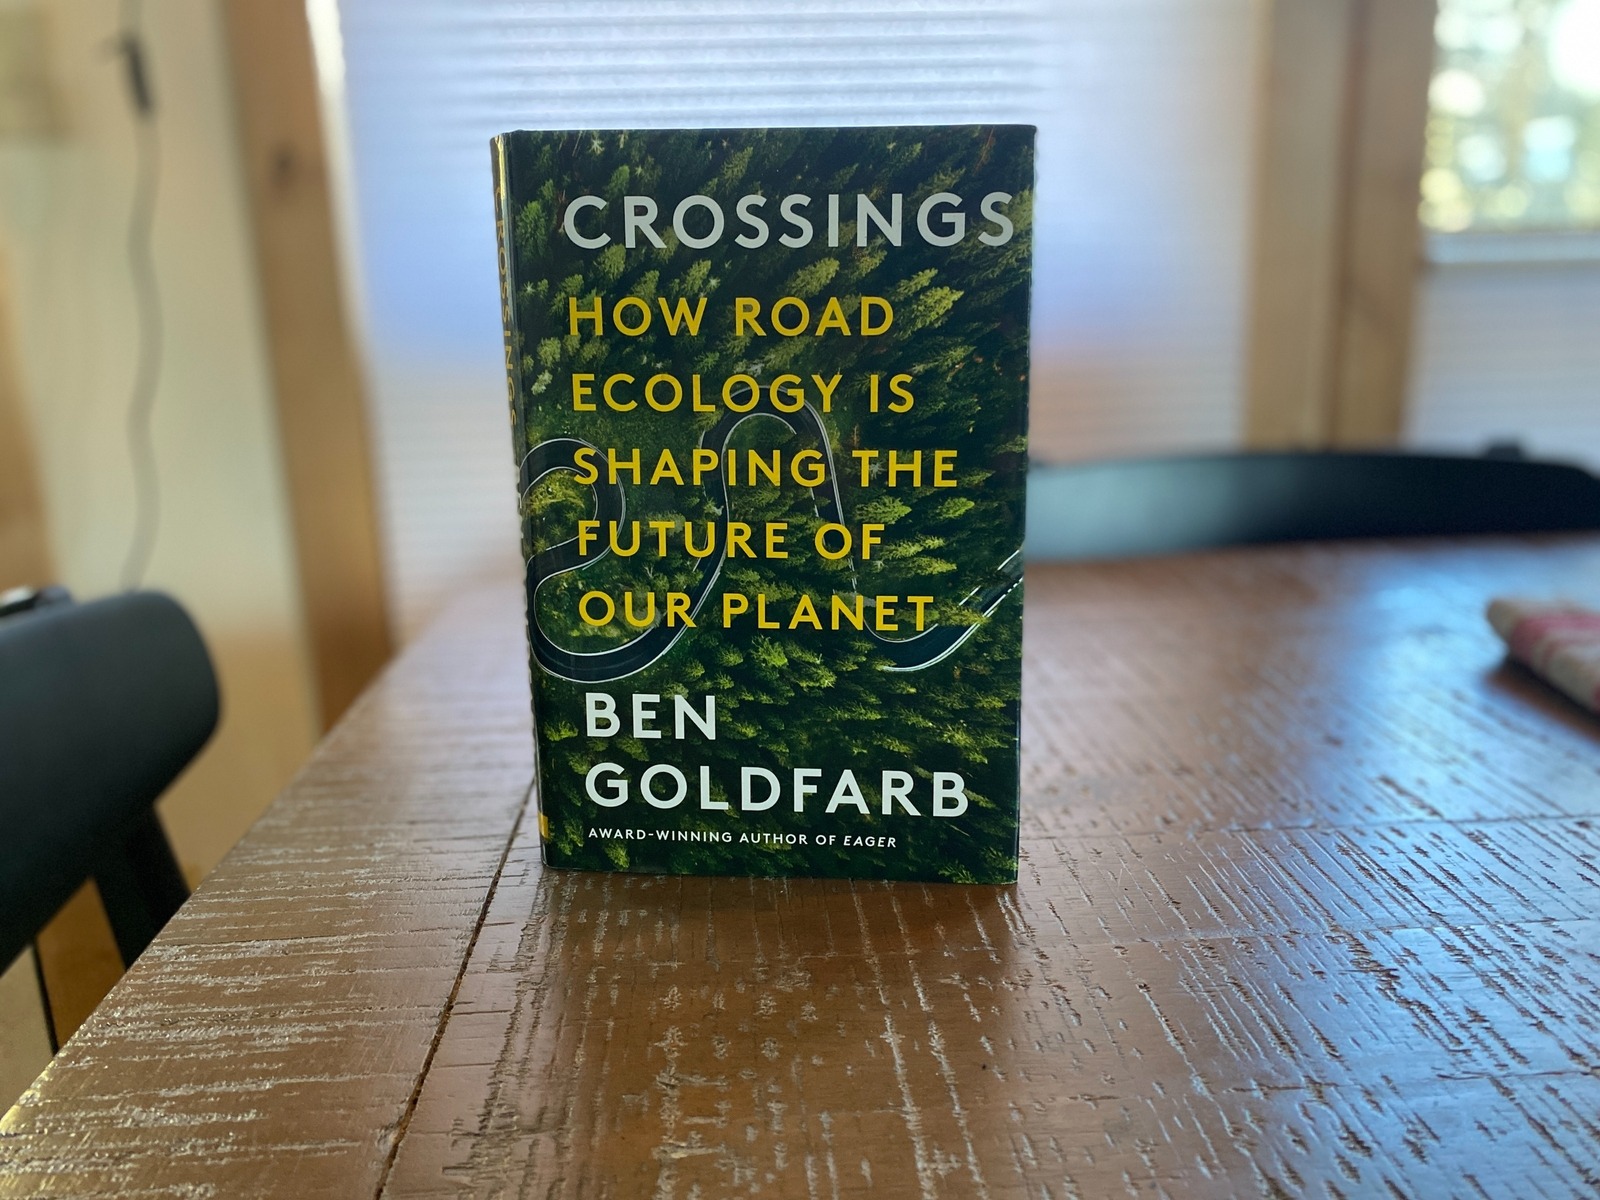 Published in September by W.W. Norton, "Crossings" is author Ben Goldfarb's second book following "Eager: The Surprising, Secret Life of Beavers and Why They Matter."